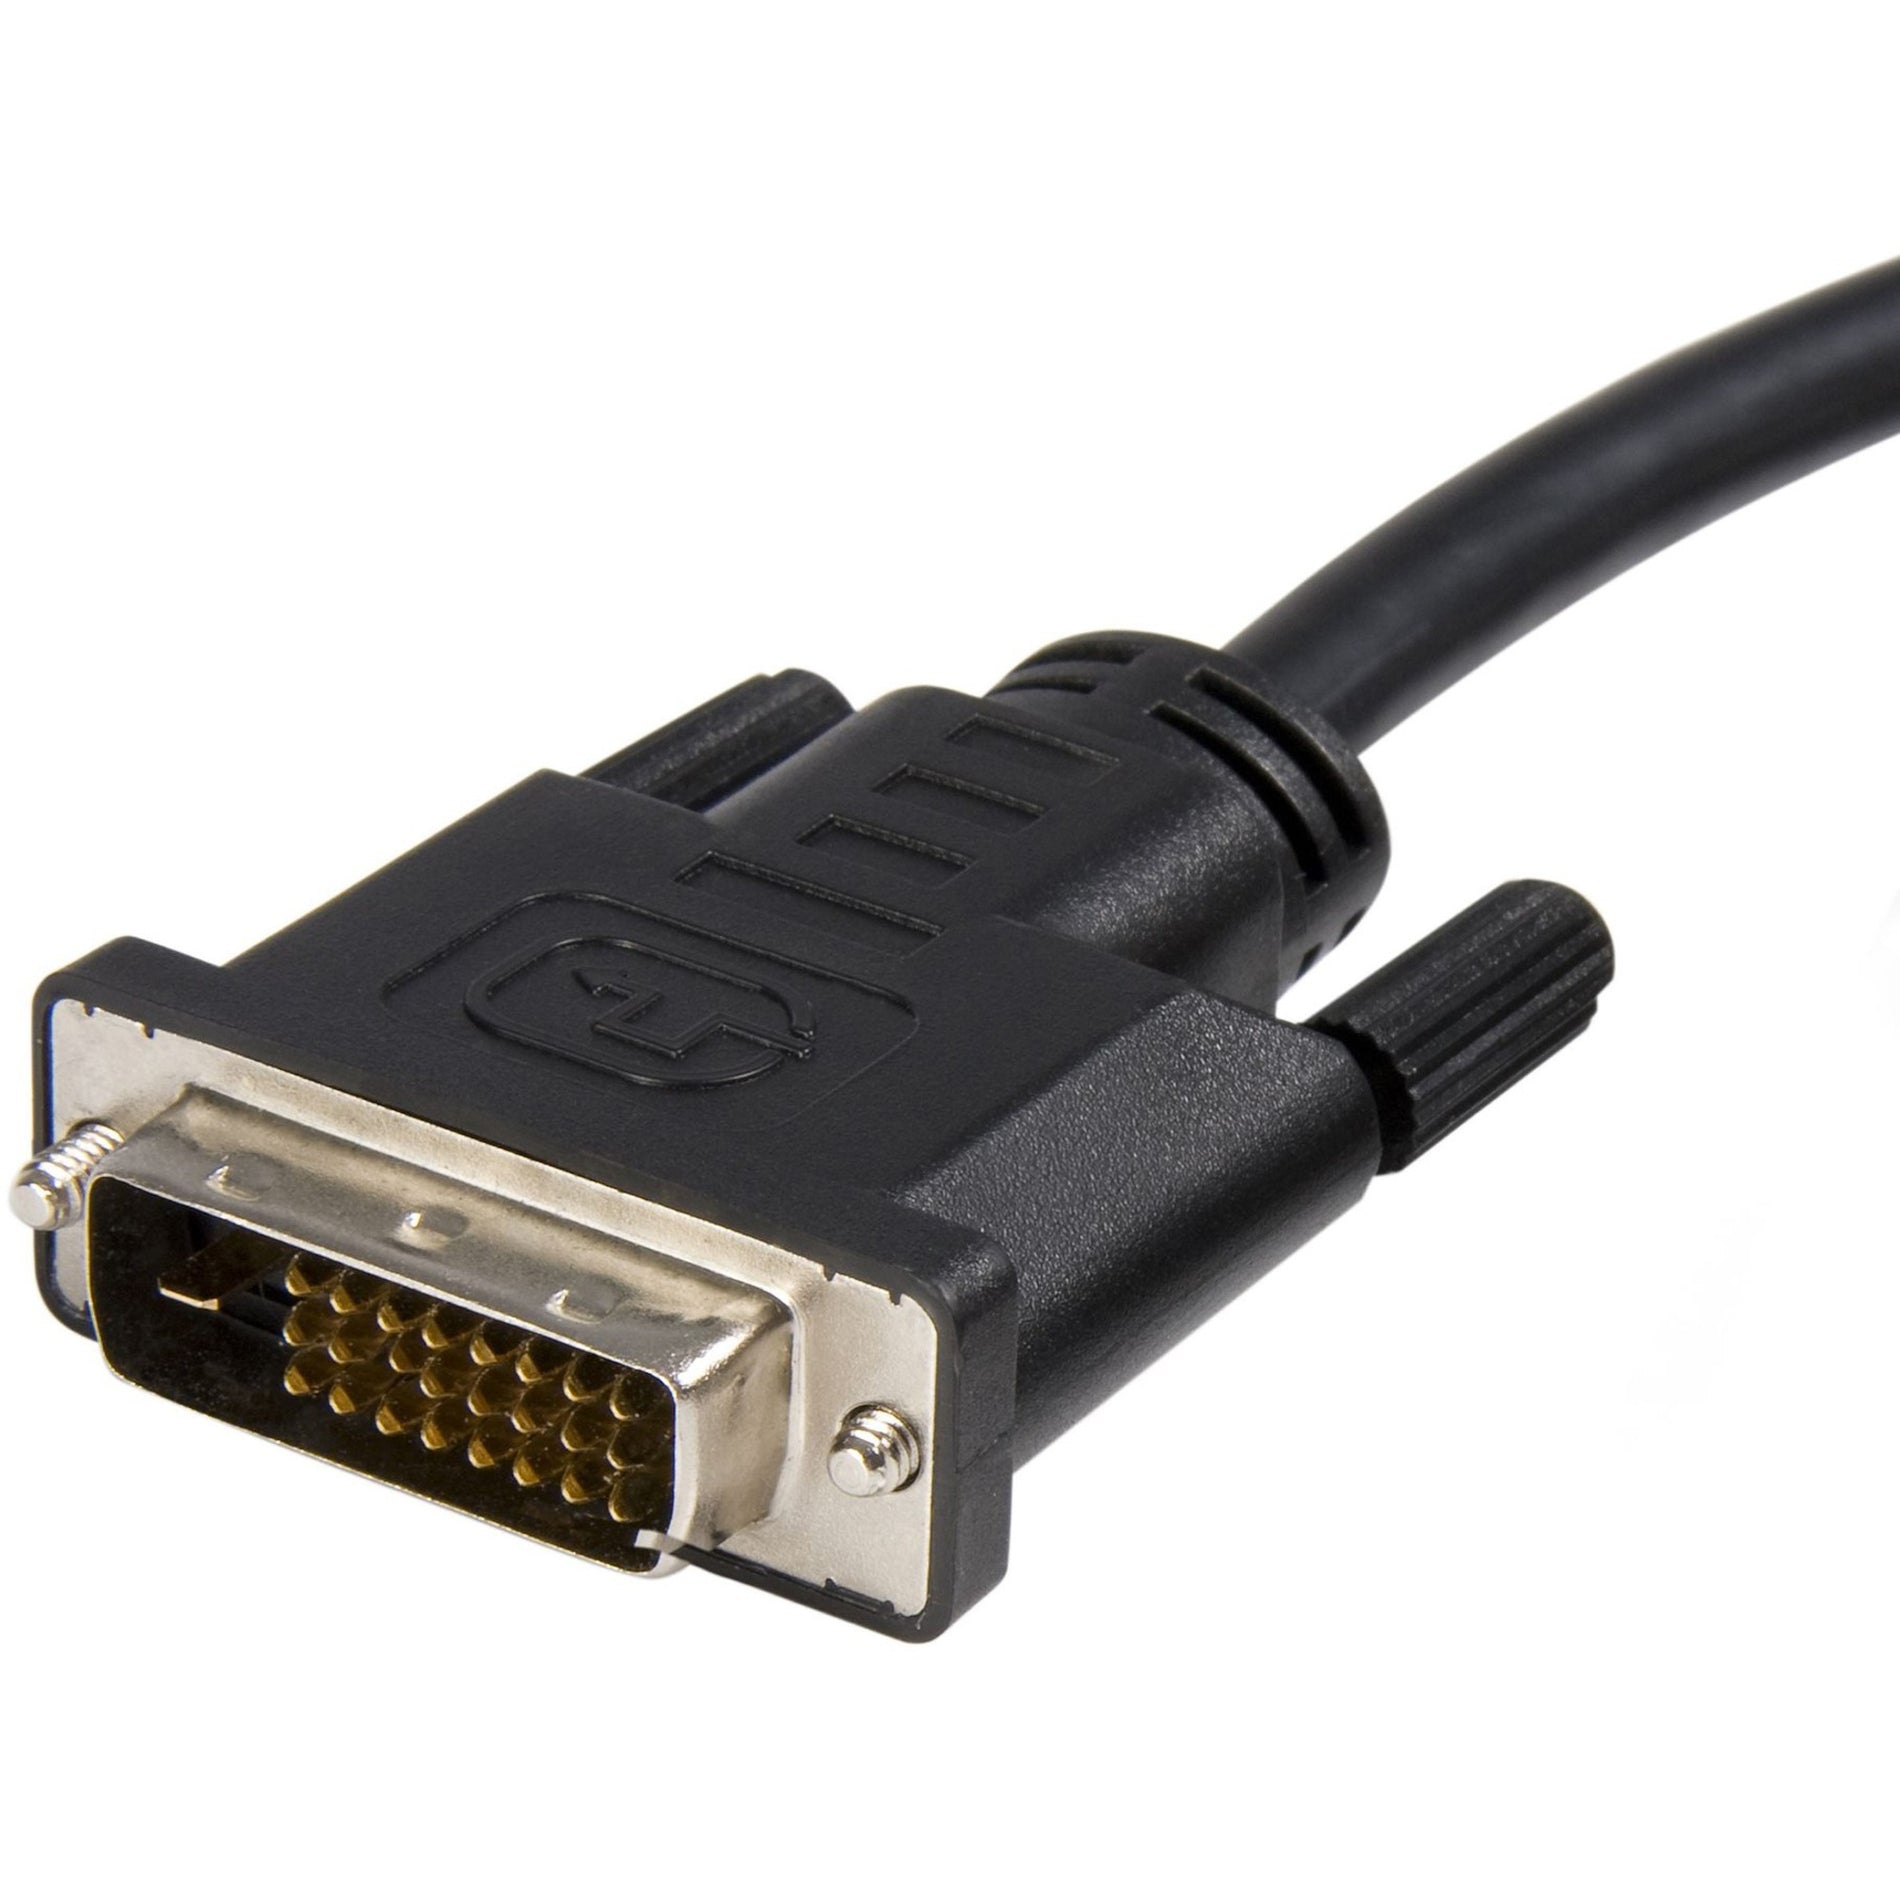 StarTech.com DP2DVIMM10 DisplayPort to DVI Cable, 10ft, 1080p Video, DP 1.2 to DVI Monitor Cable